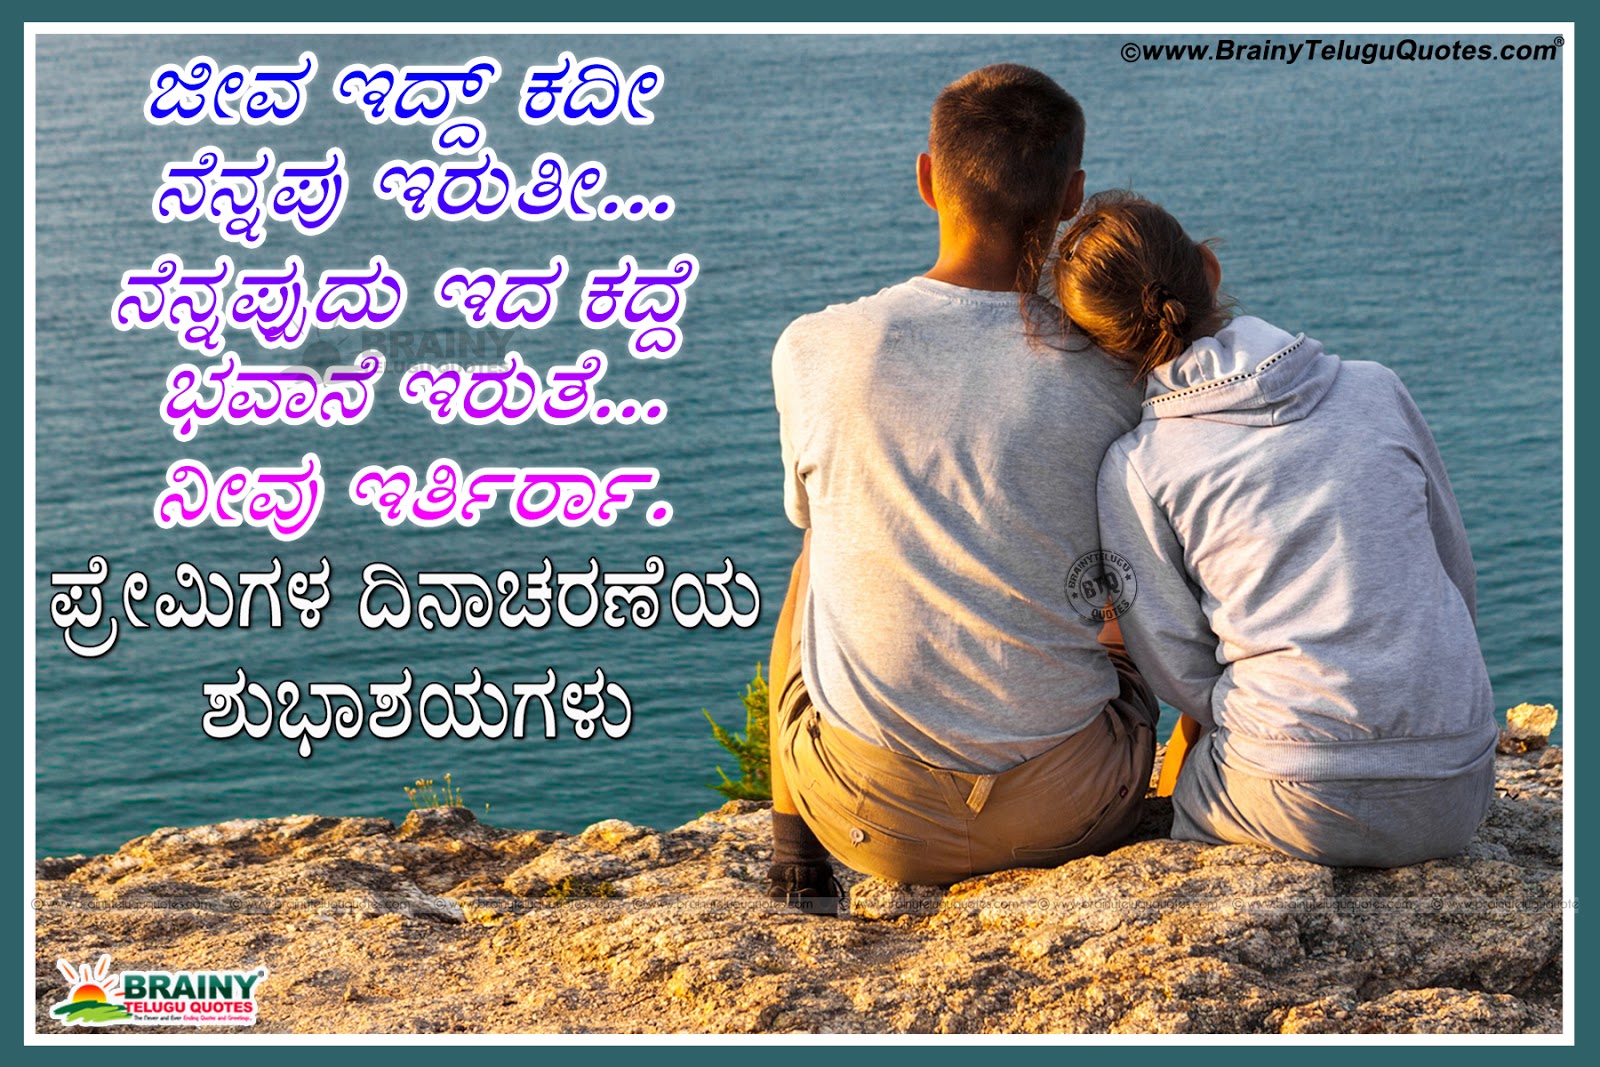 New valentines day Wishes and Messages in kannada Language Kannada New valentines day Kavanagalu